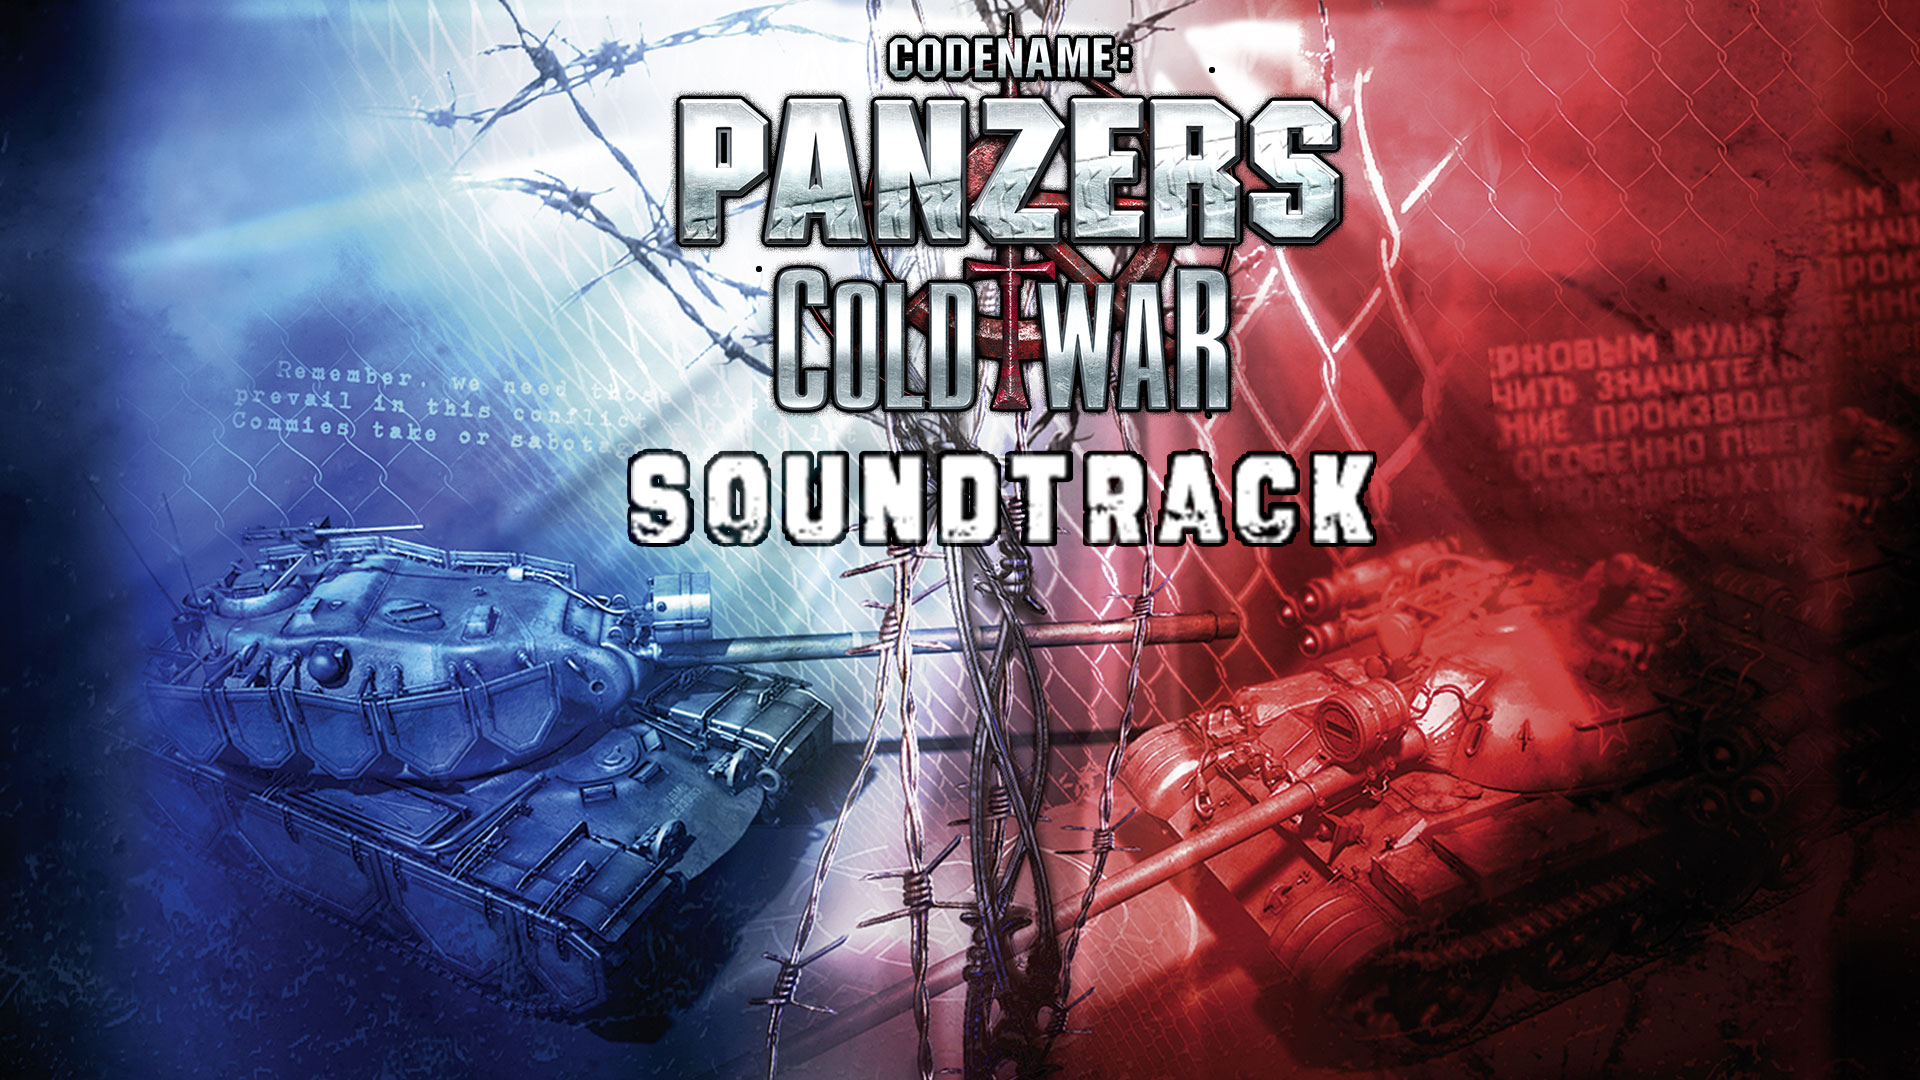 Codename Panzers Cold War Soundtrack Featured Screenshot #1